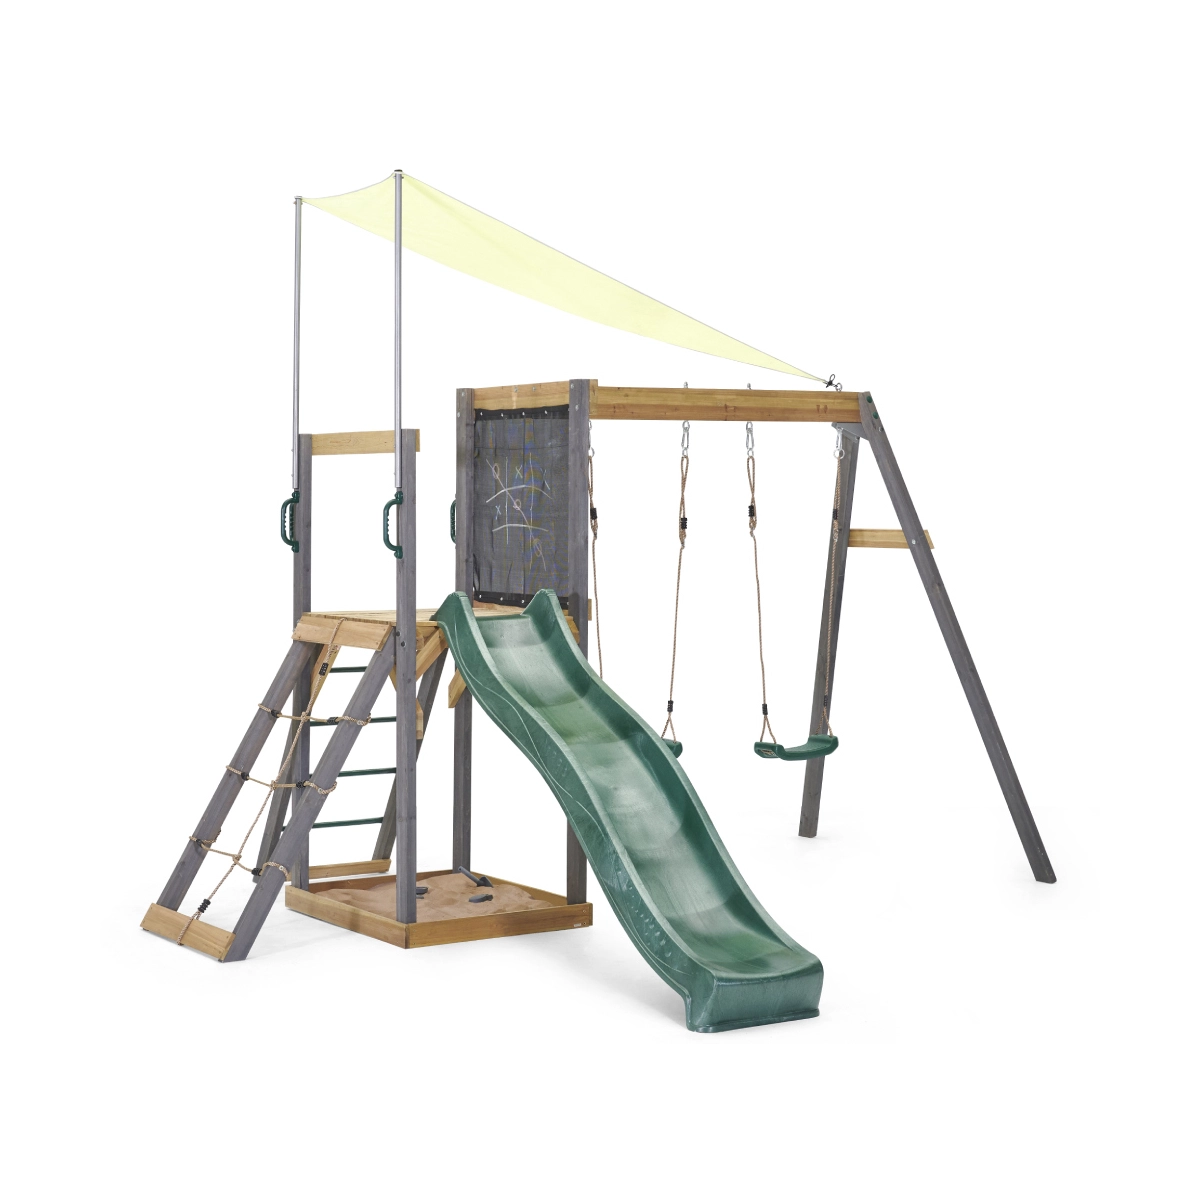 Plum Play Siamang Wooden Playcentre